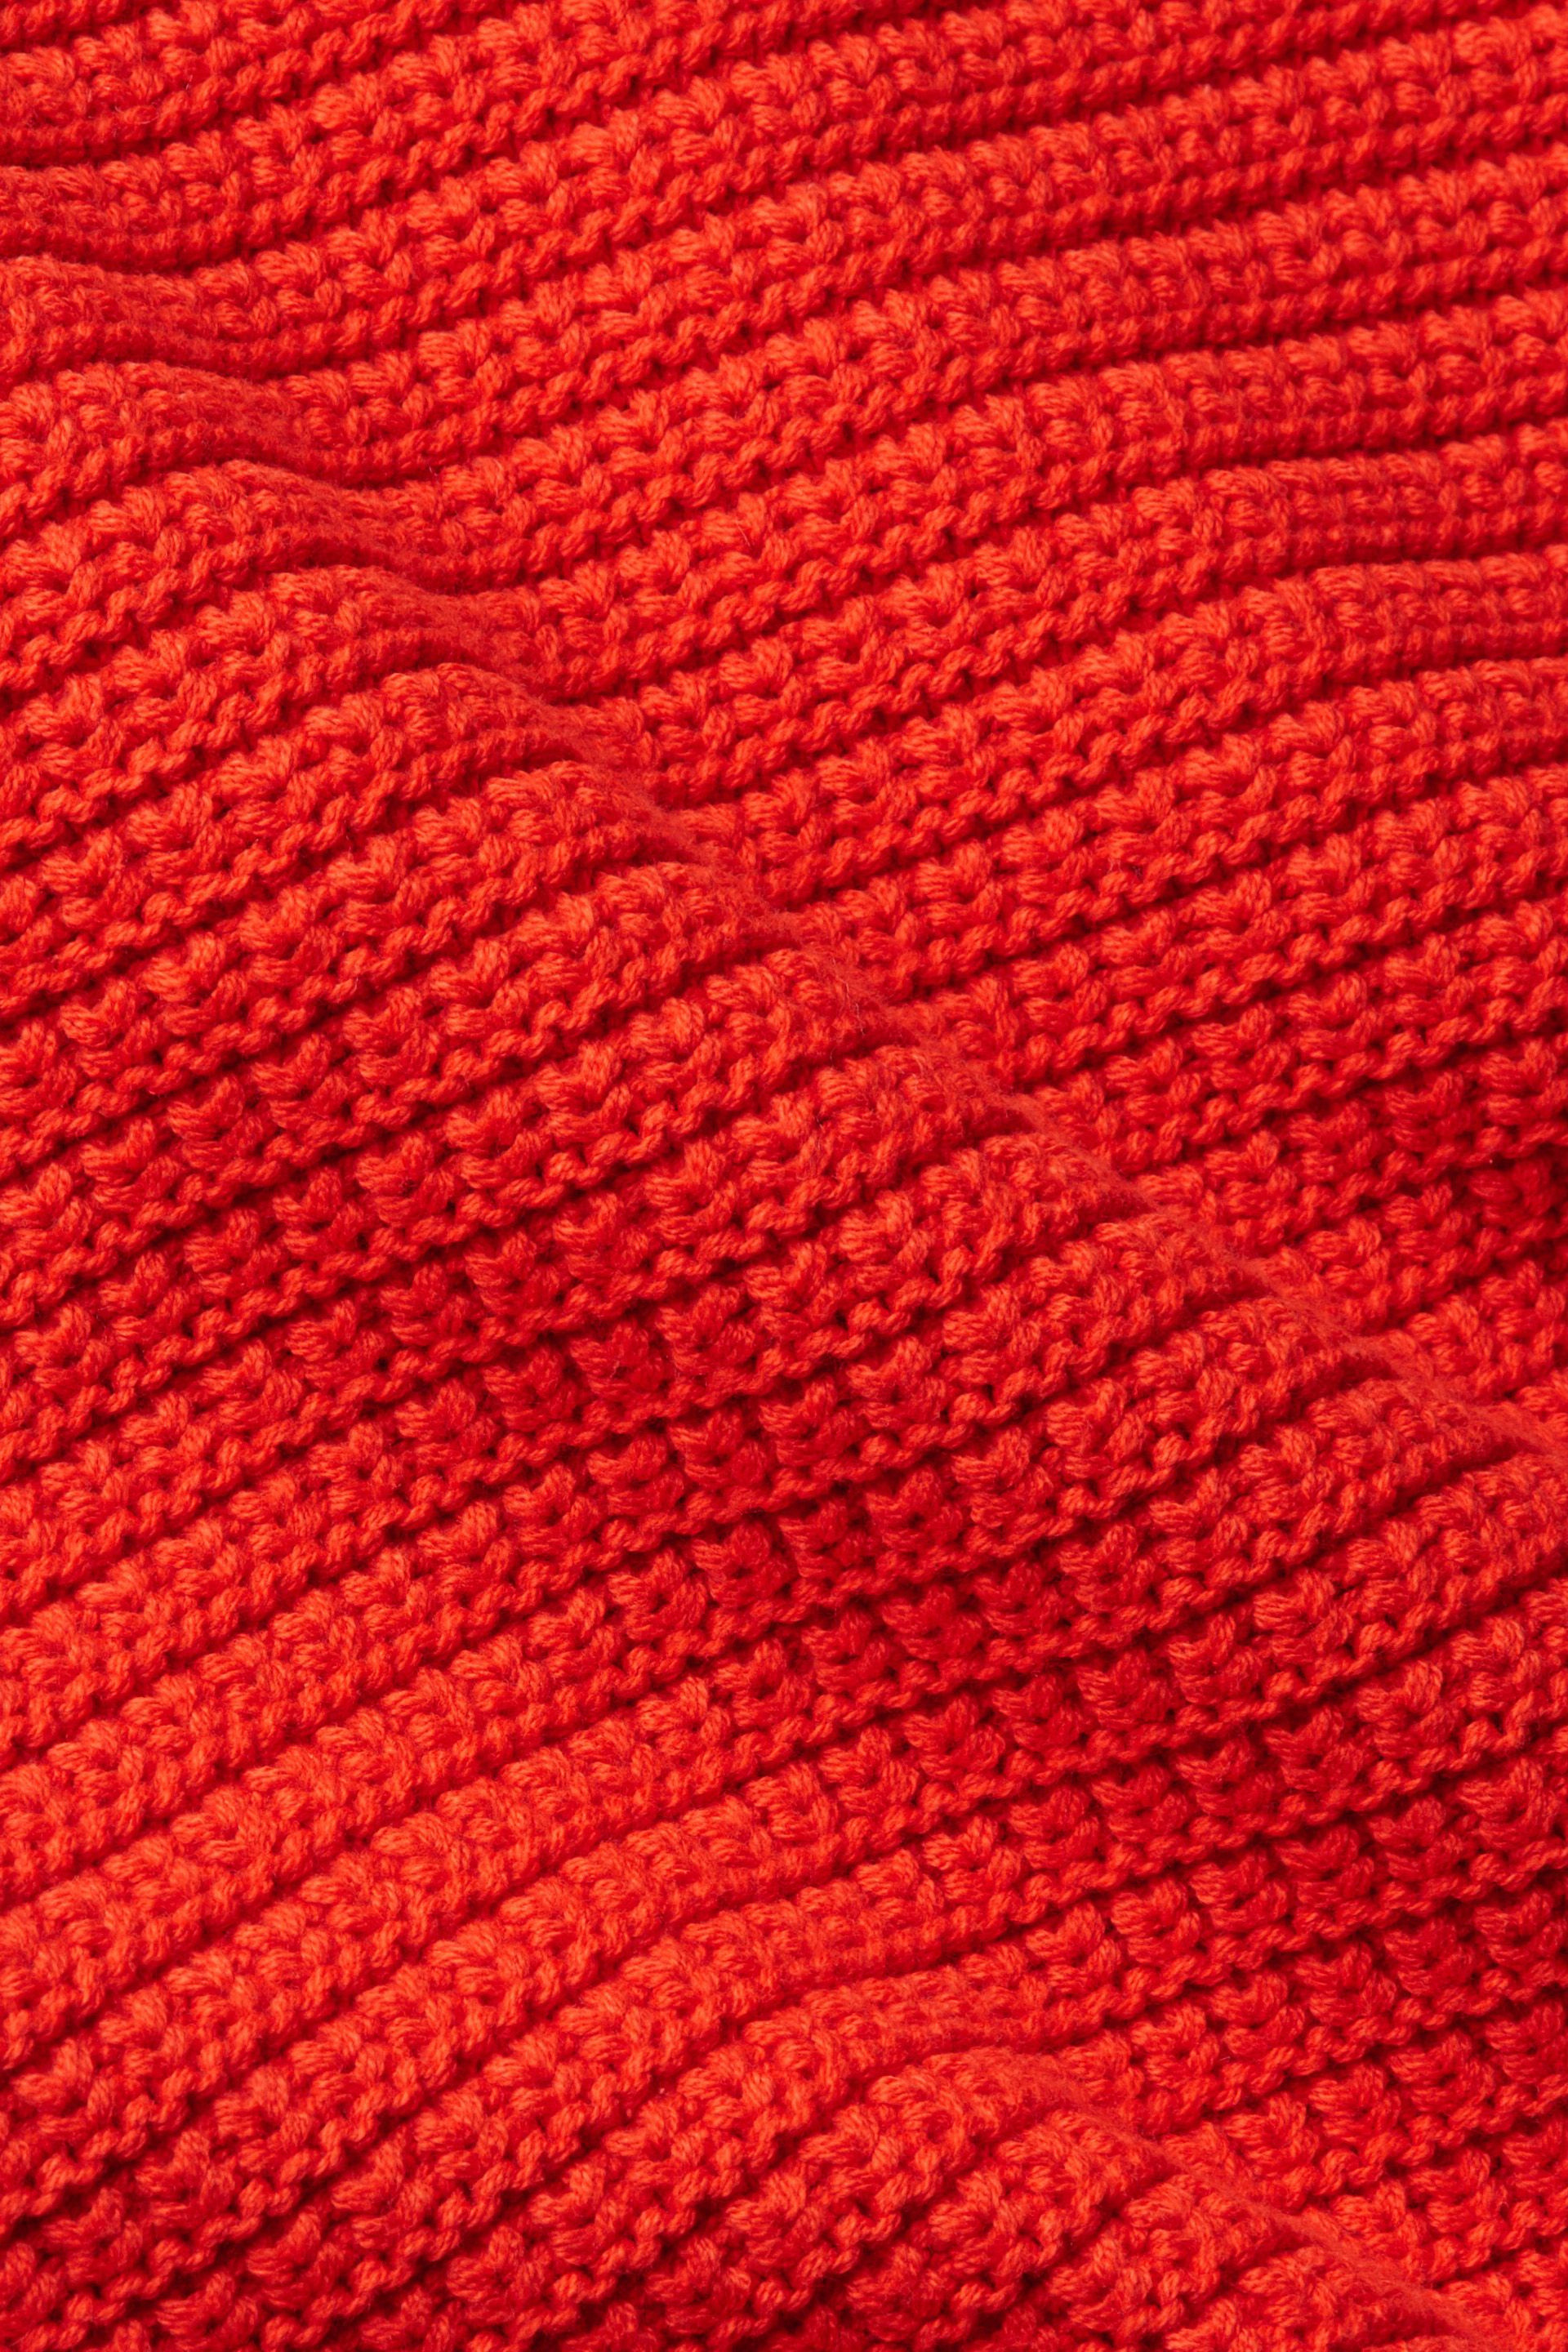 Esprit - Gilet a maglia in misto cotone, Rosso, large image number 3